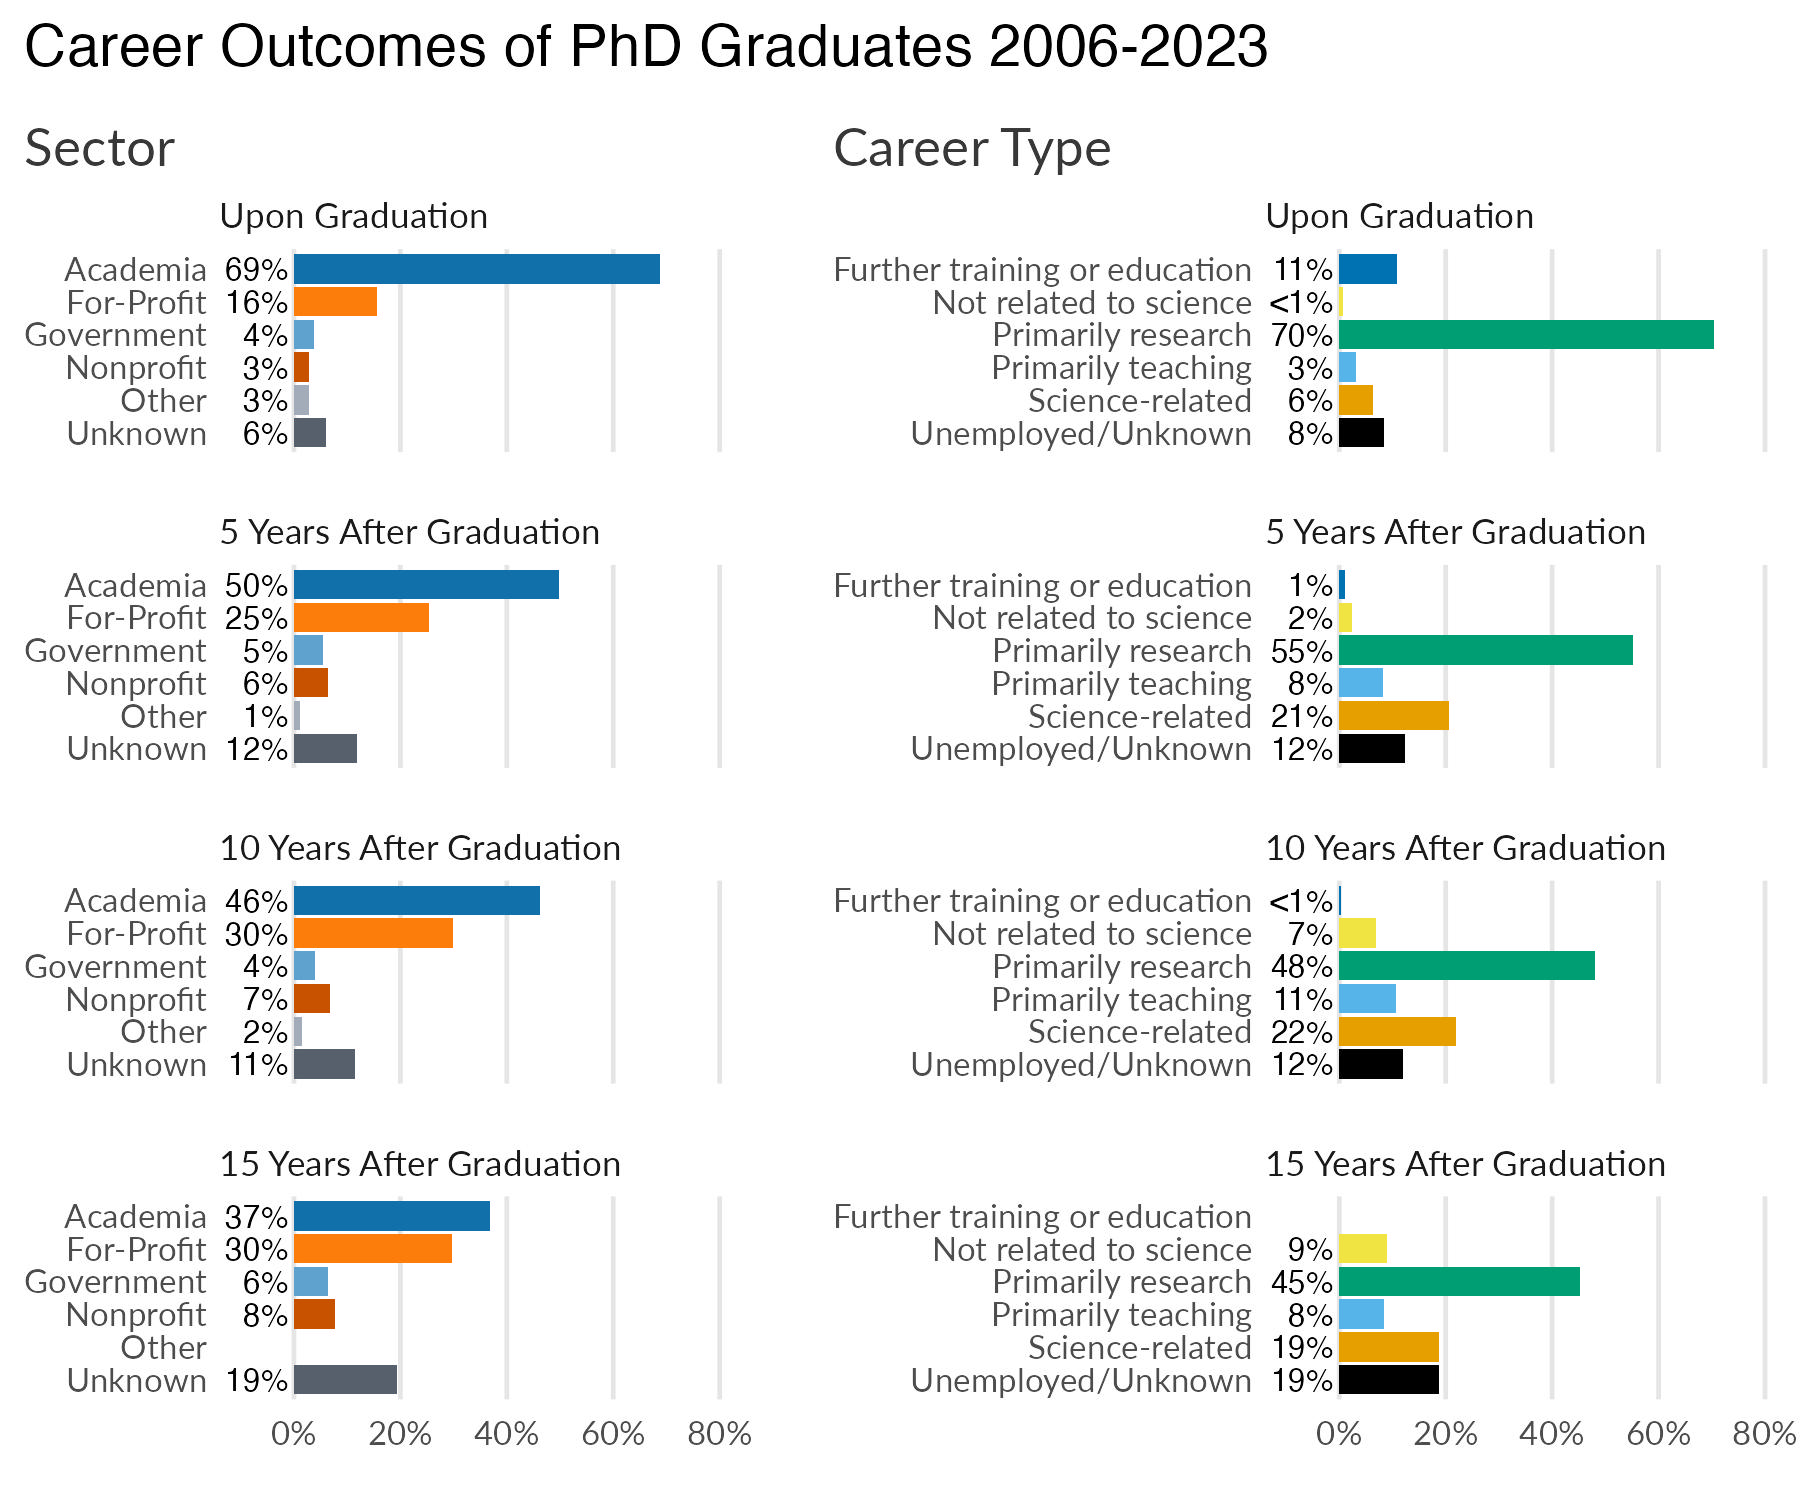 School of Medicine career outcomes summary for doctoral program graduates,  graduating classes 2006 through 2023; includes percent by career sector and career type at four time points: initial employment upon graduation, and at 5, 10, and 15 years after graduation